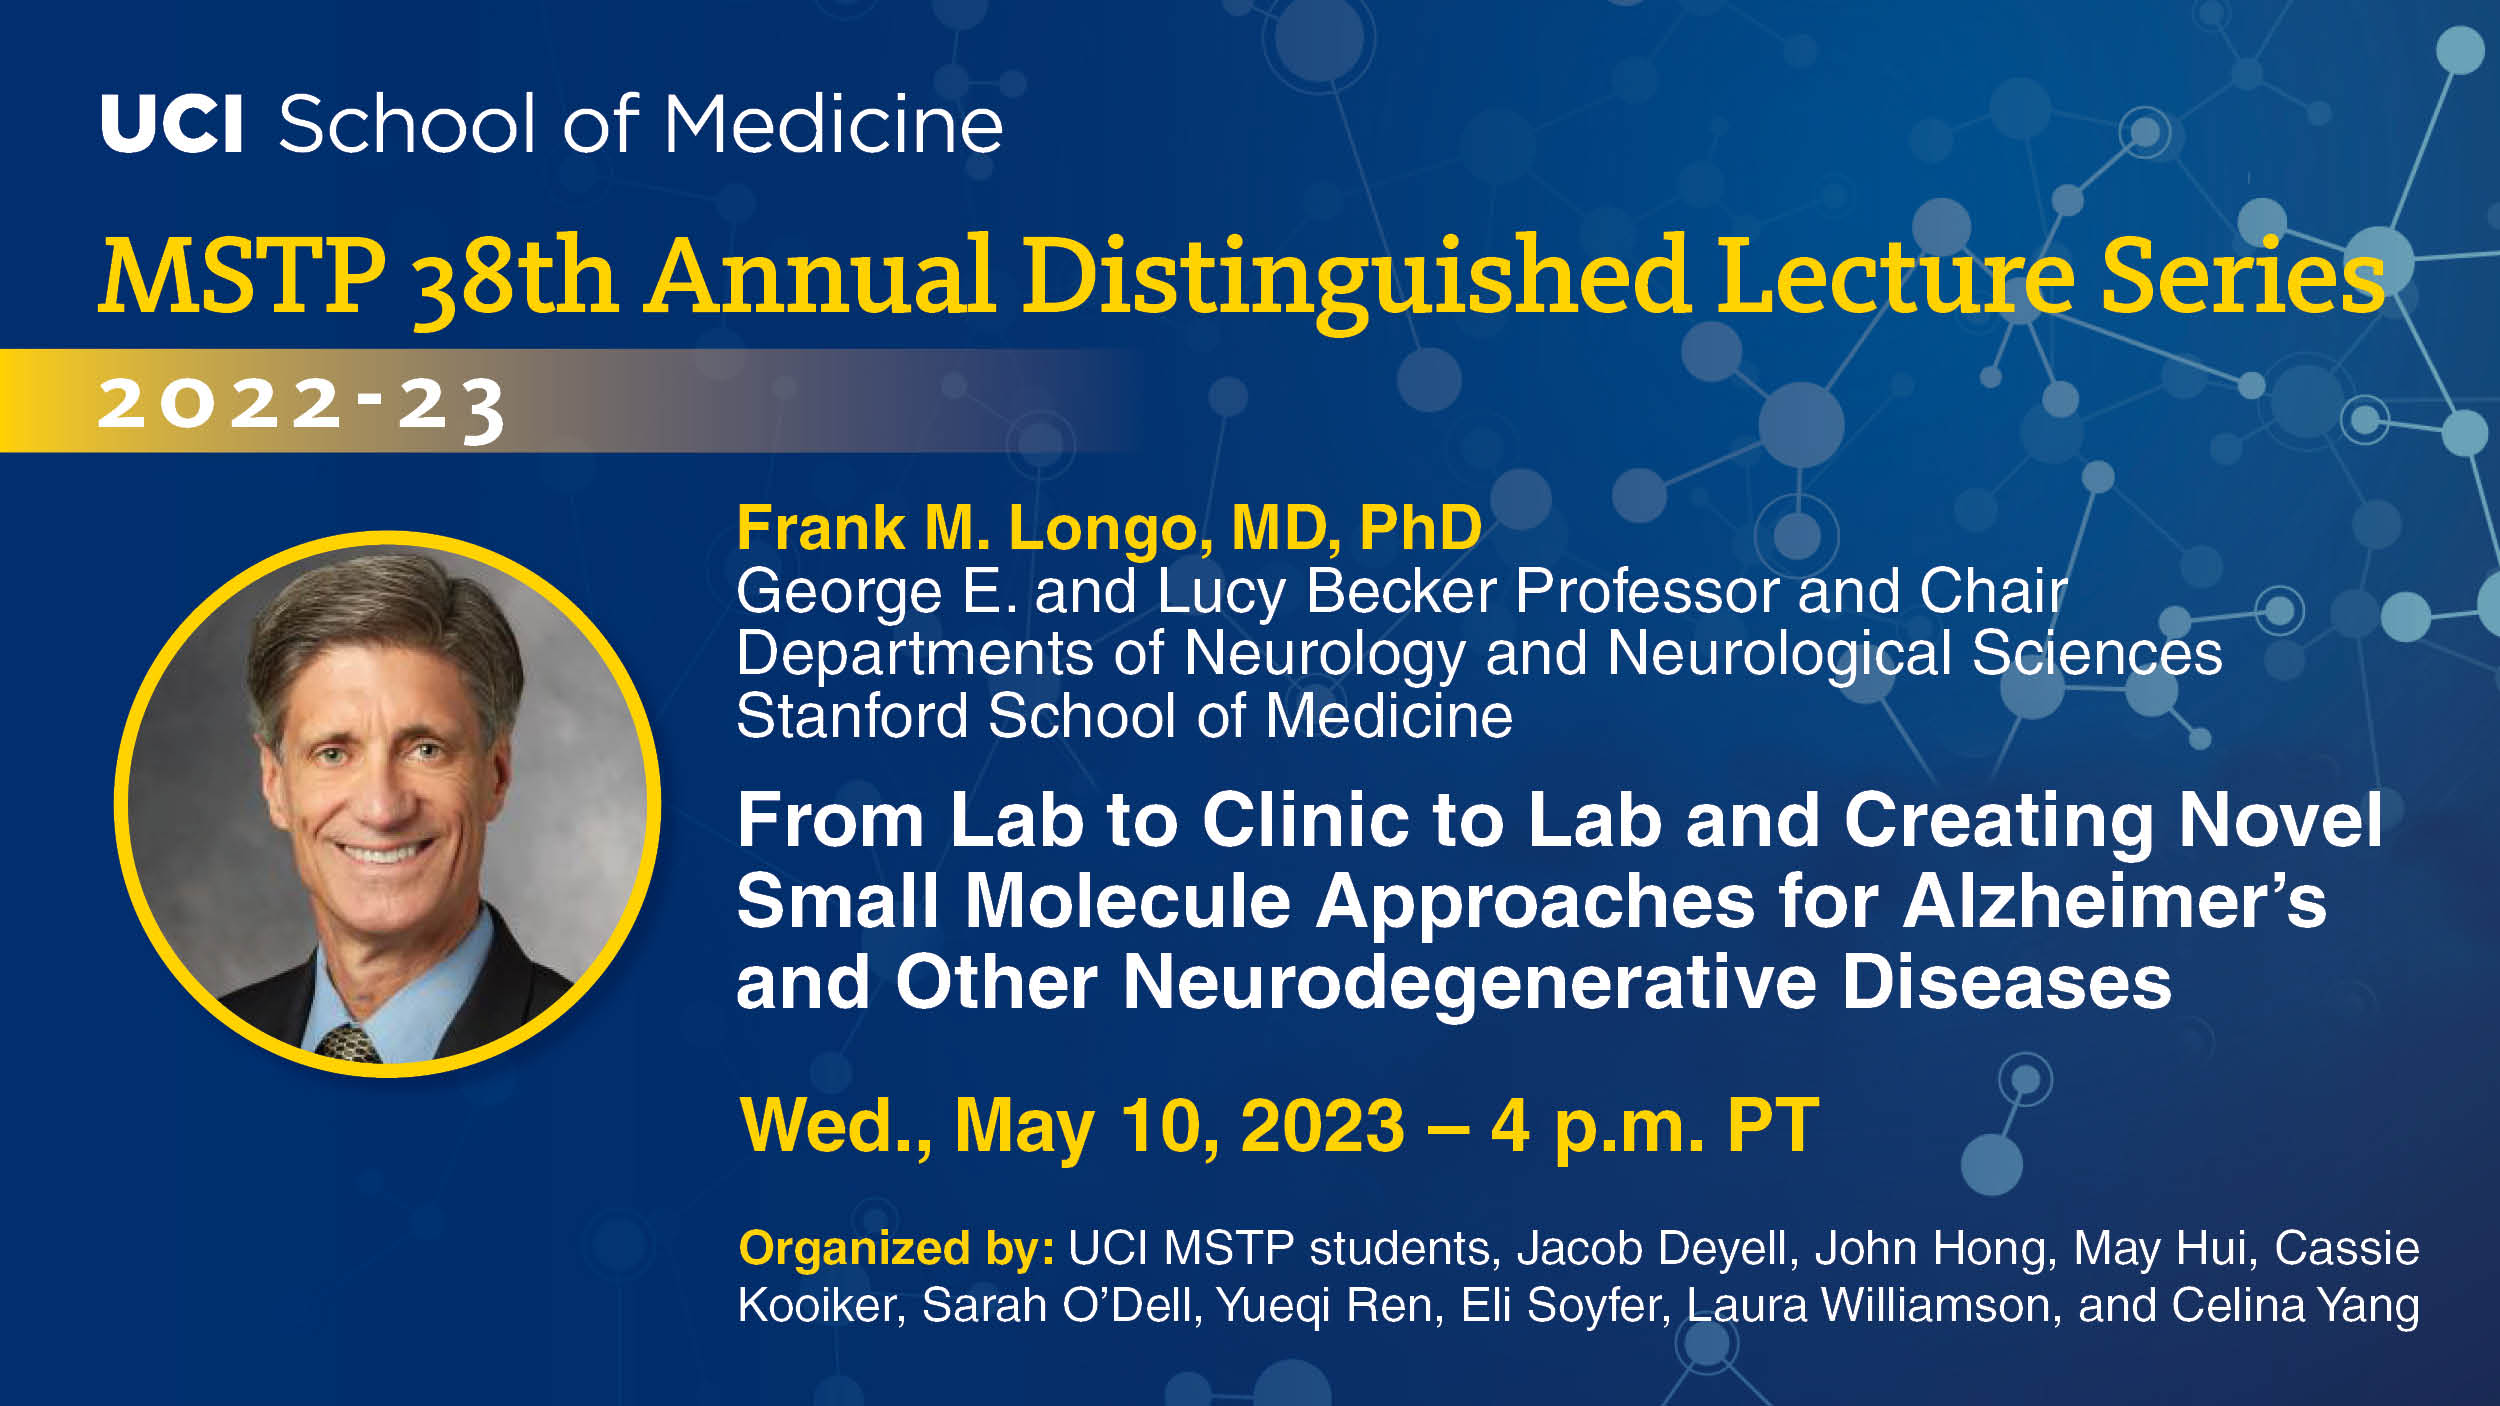 Frank M. Longo, MD, PhD distinguished lecture